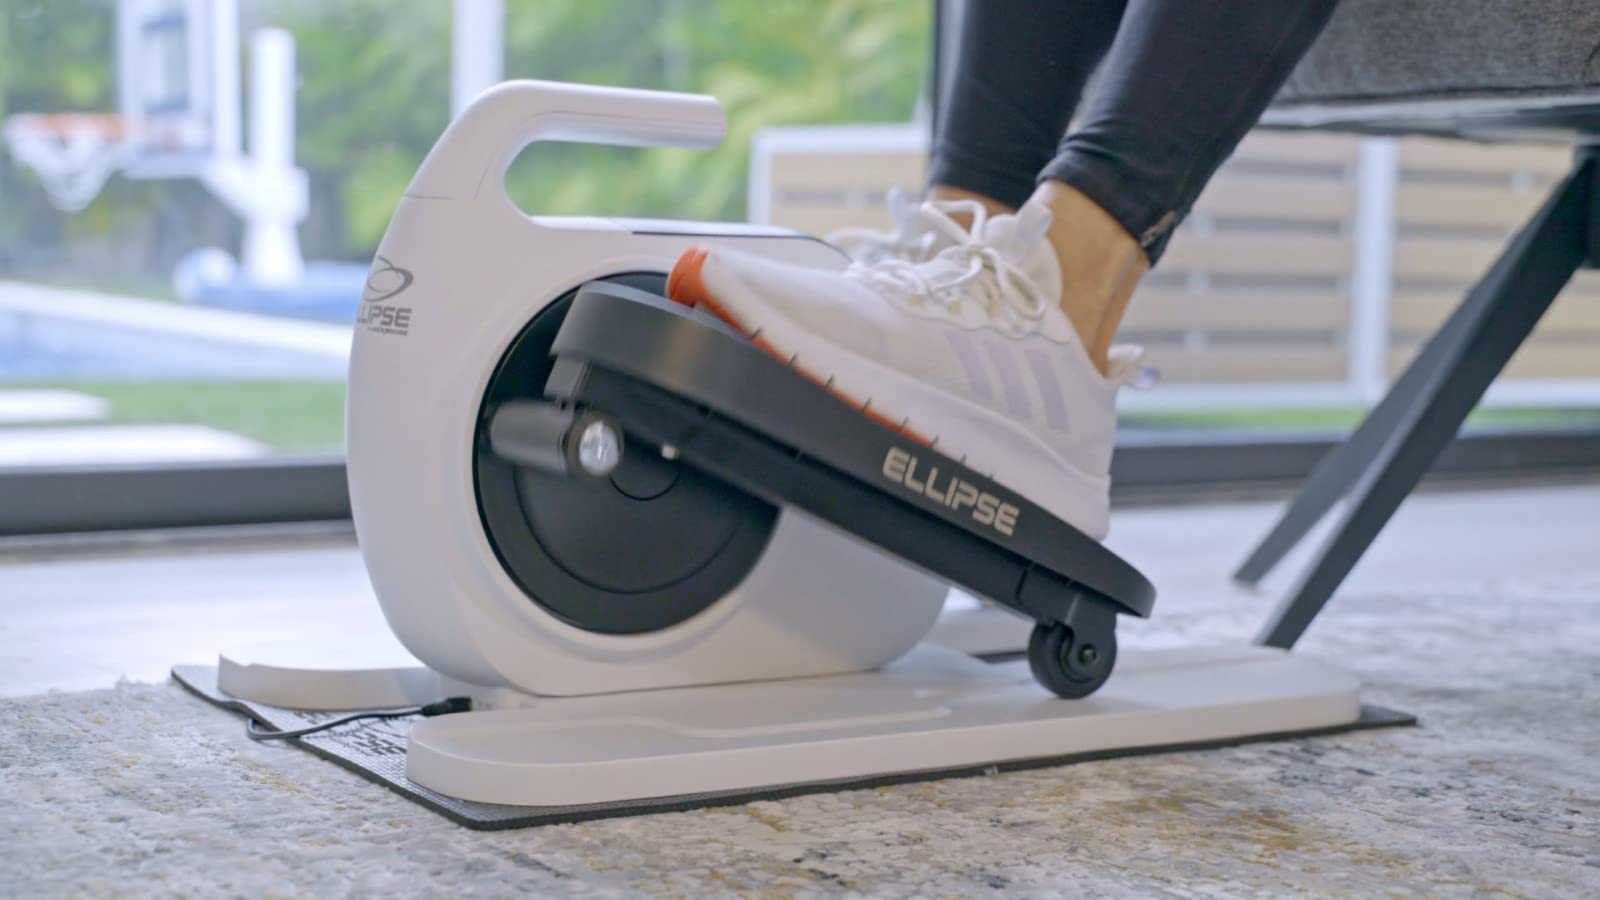 Exercise while you work with this under-desk elliptical for 33% off